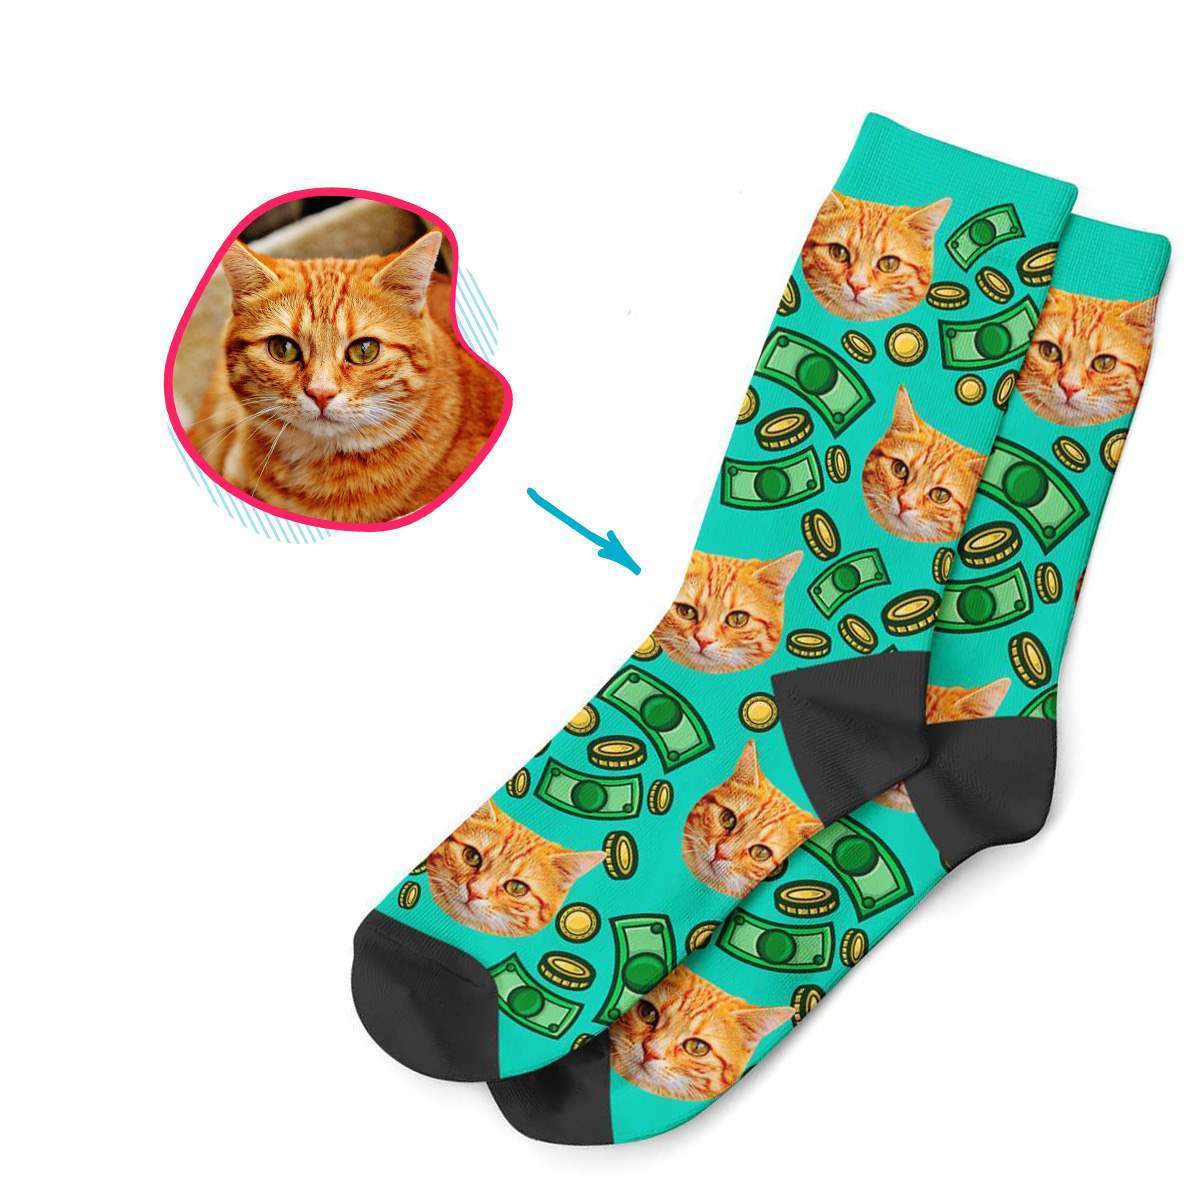 mint Money socks personalized with photo of face printed on them